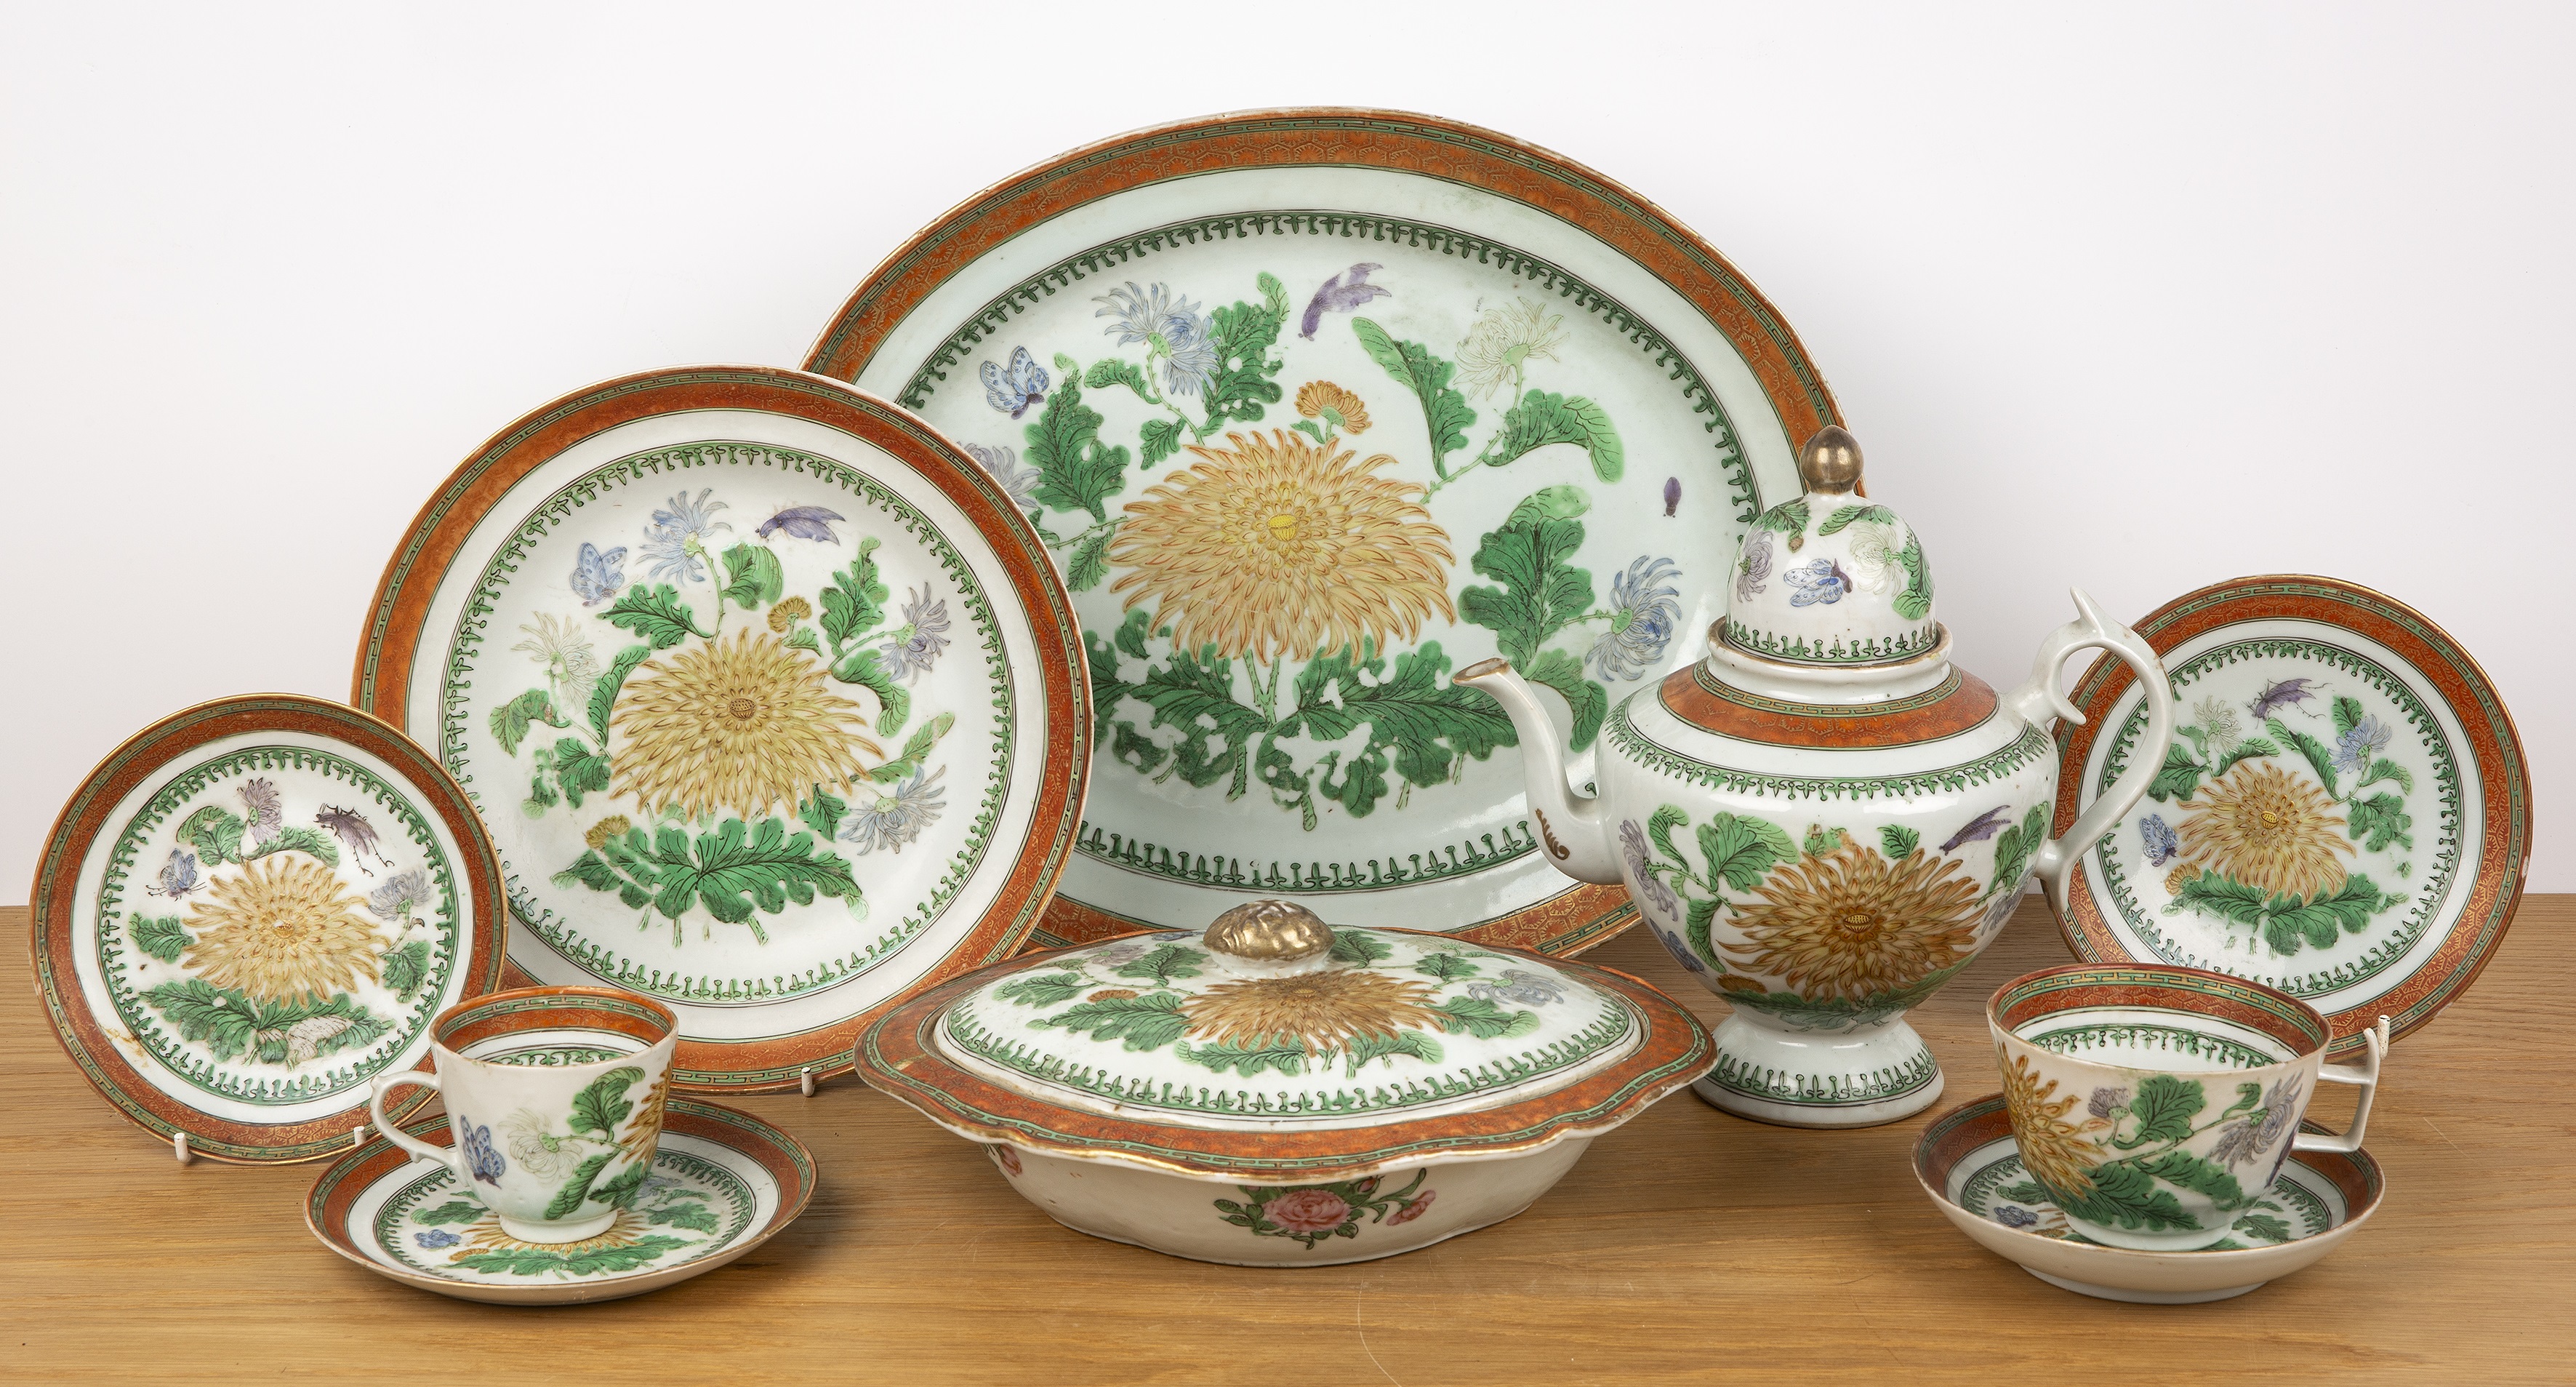 Part Canton export porcelain service Chinese, late 19th Century painted with chrysanthemums and with